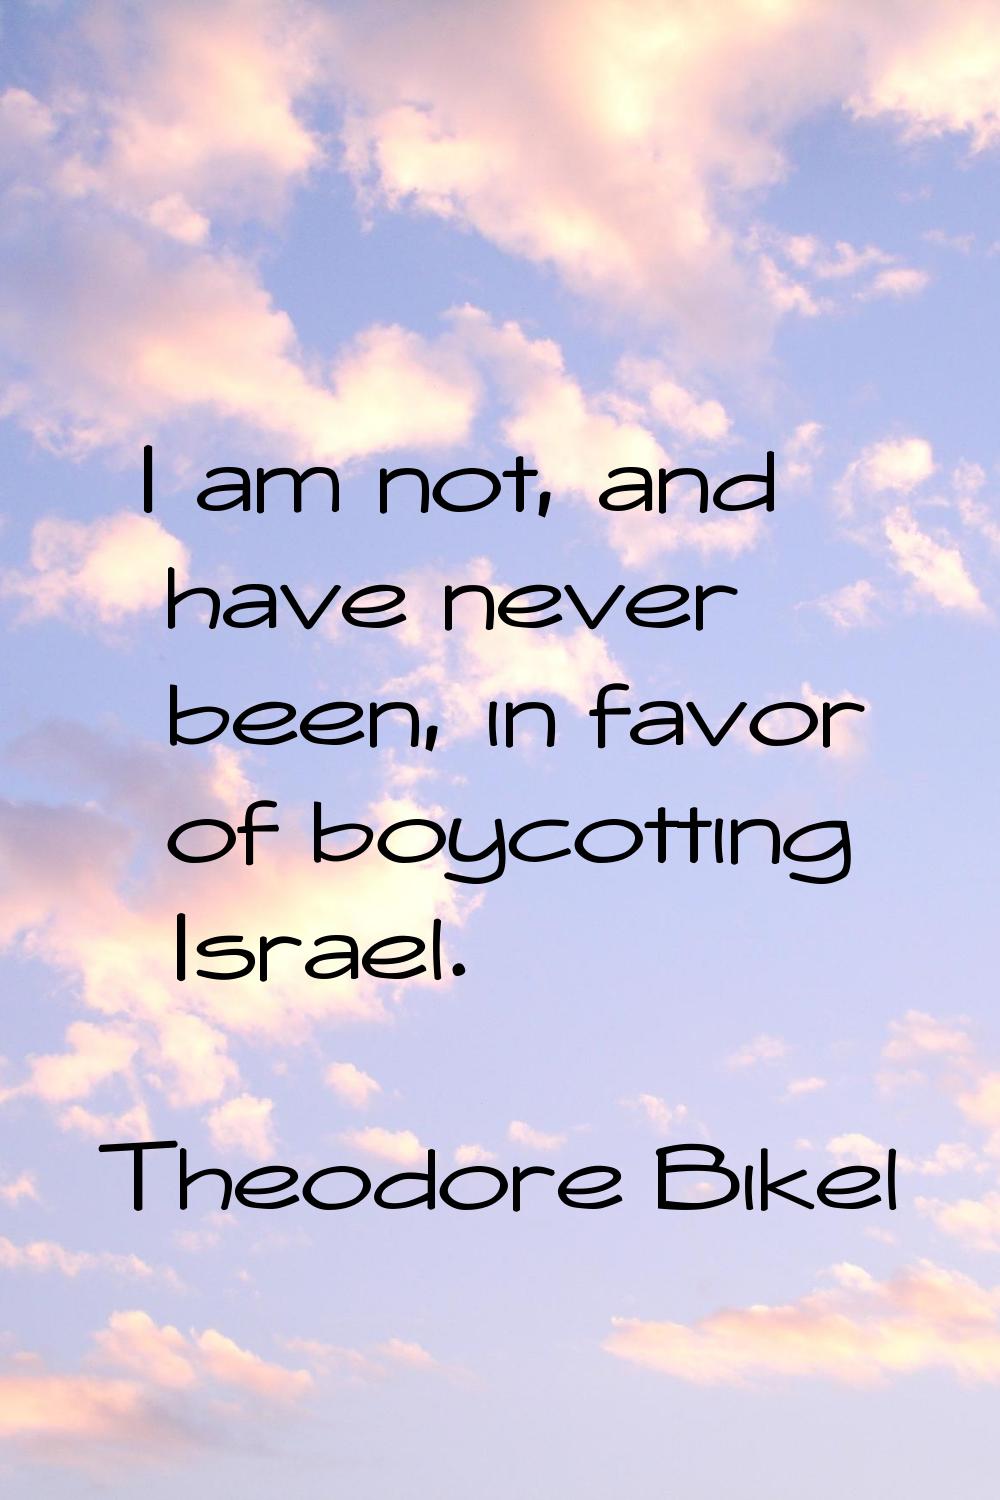 I am not, and have never been, in favor of boycotting Israel.